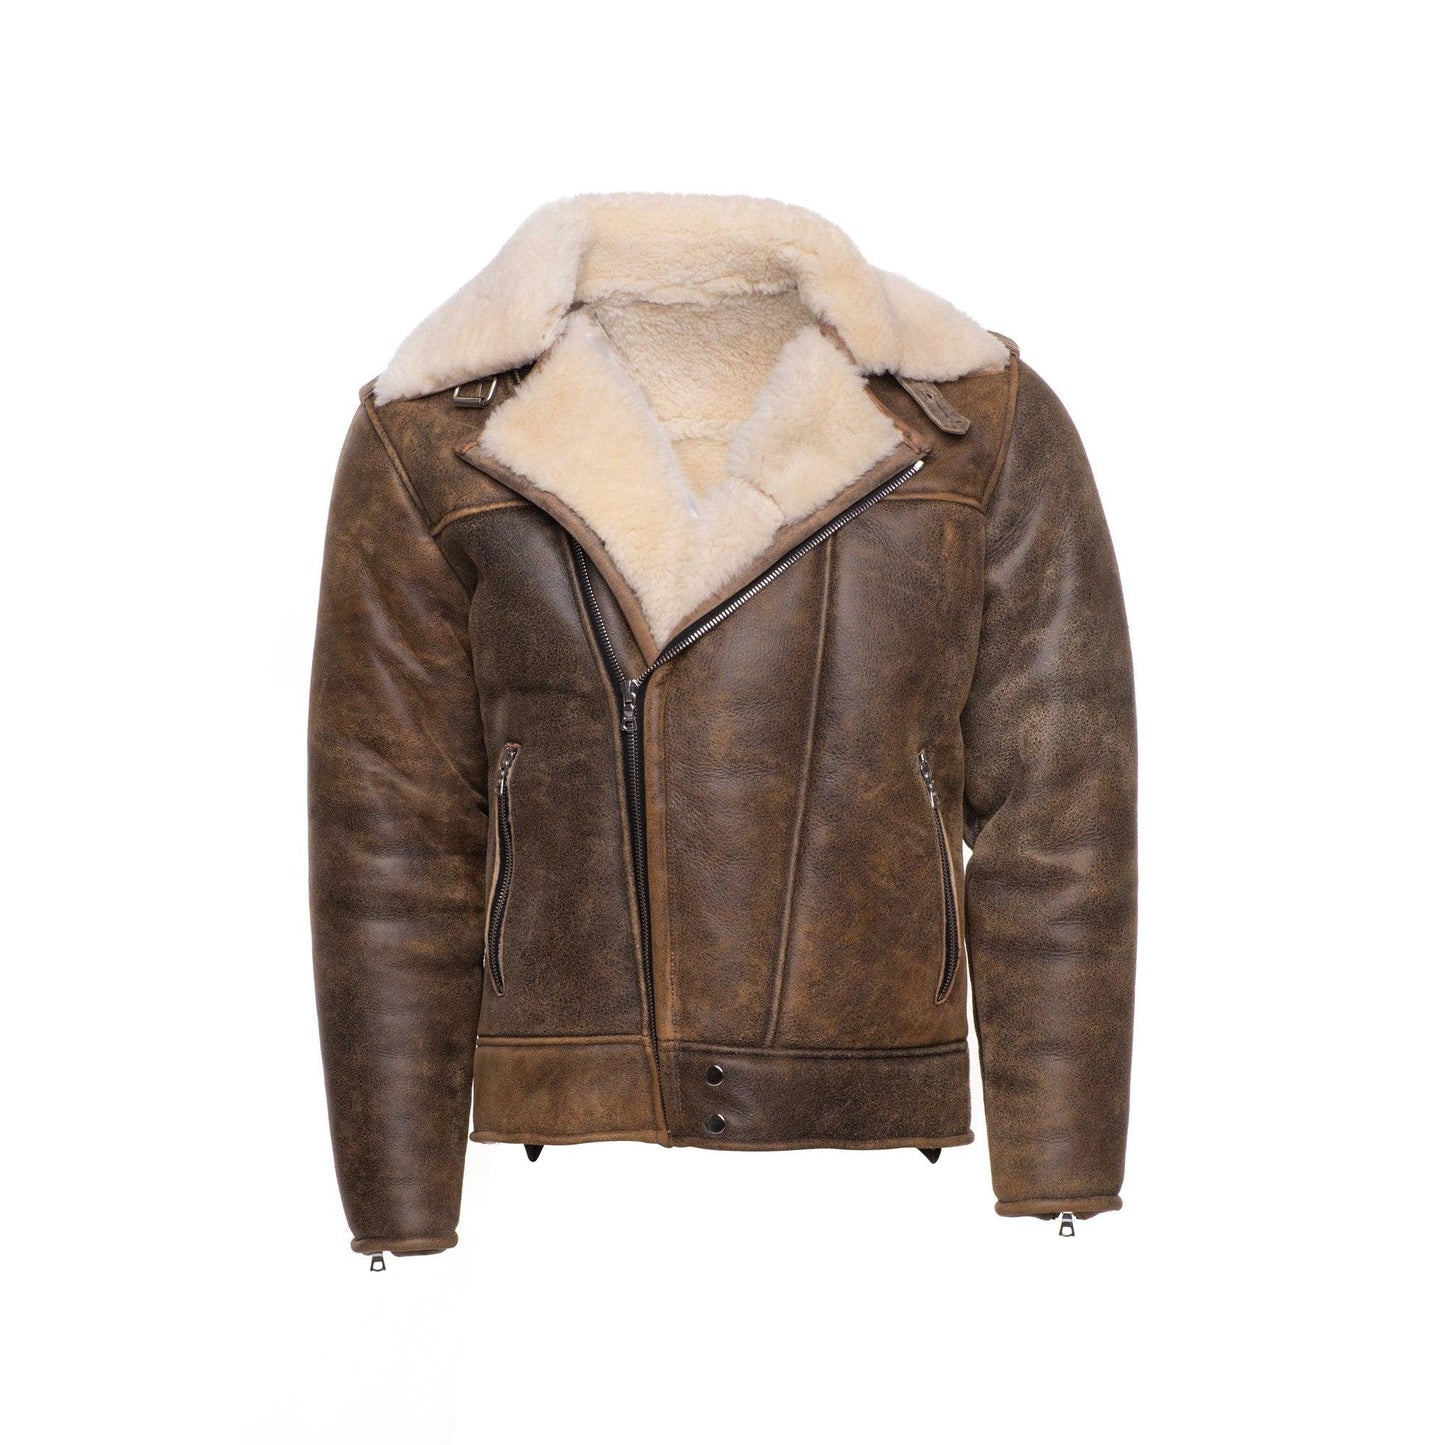 Distressed Biker bomber shearling jacket with notch lapels